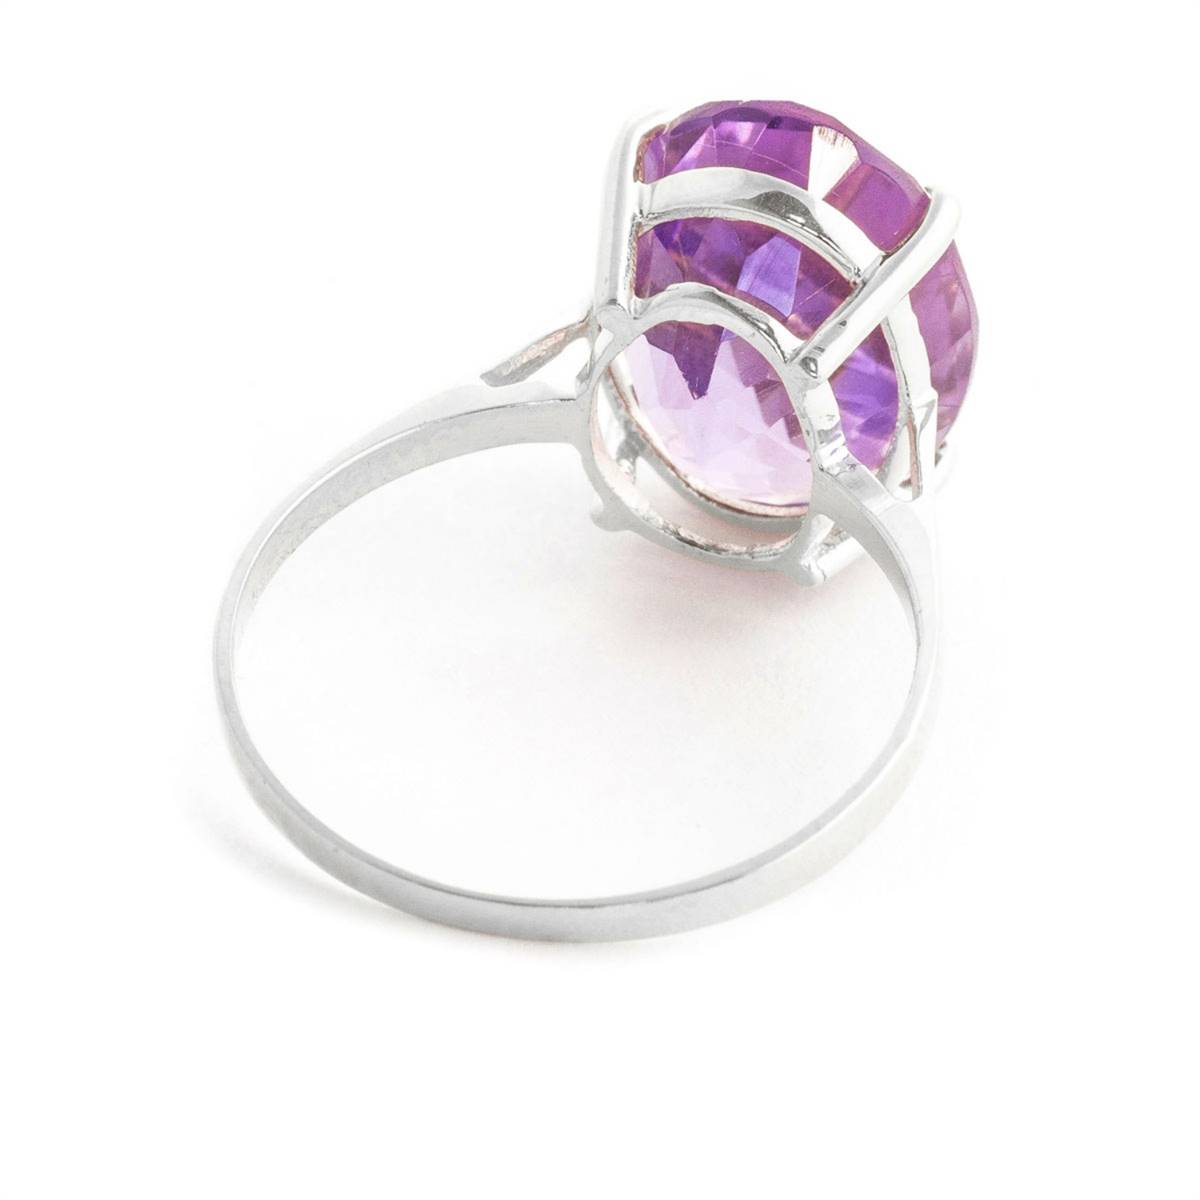 7.55 Carat 14K Solid White Gold Ring Natural Oval Purple Amethyst